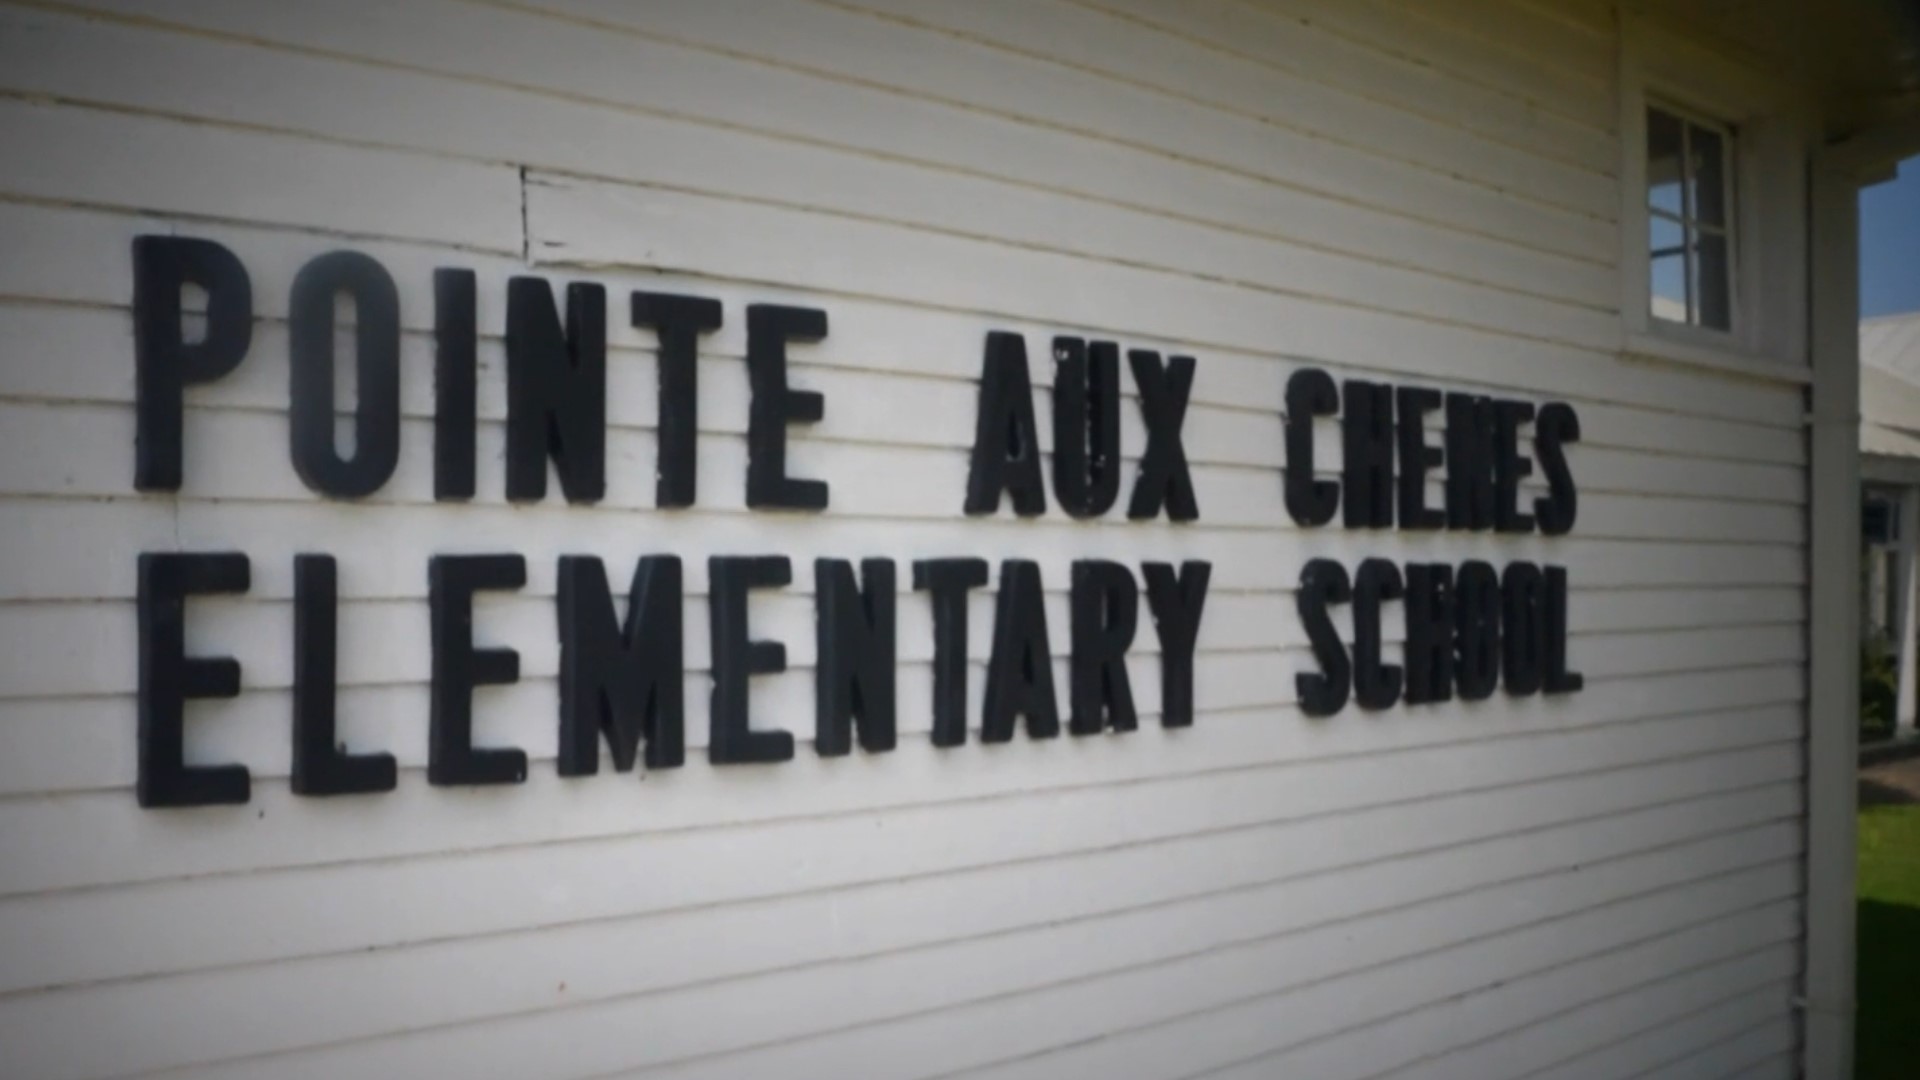 Renovations on Pointe-aux-Chenes Elementary are expected to start in January or February and should be completed in a year and a half, Will McGrew said.